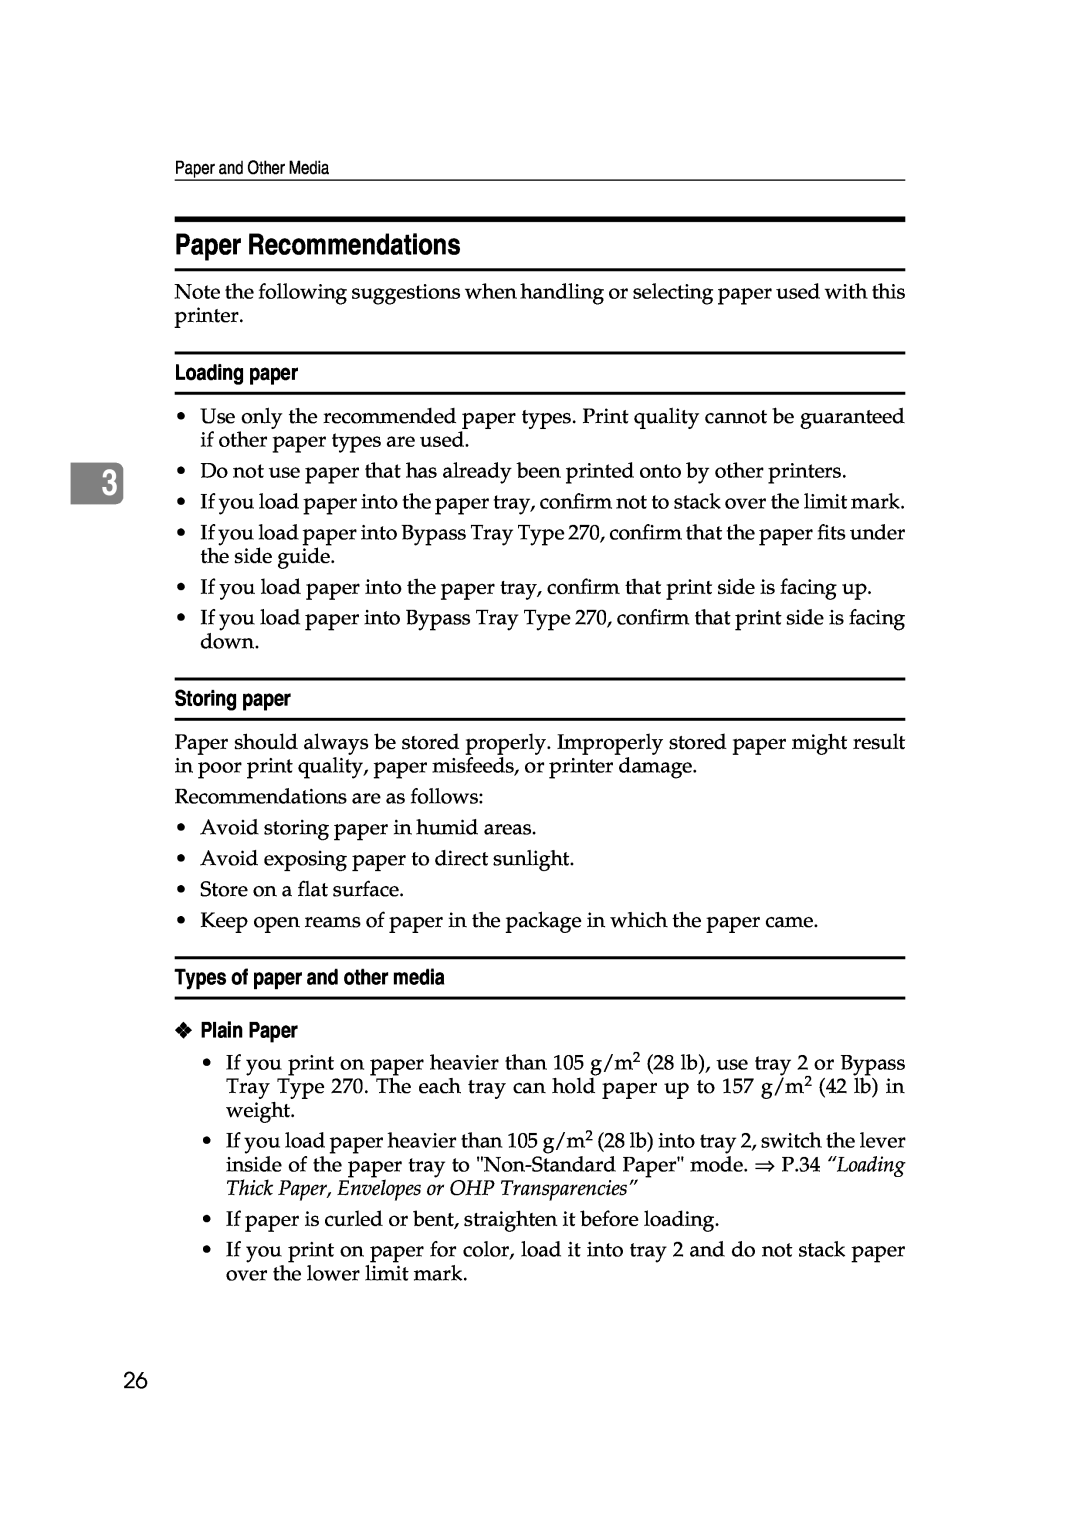 Lanier AP3200 manual Paper Recommendations, Loading paper, Storing paper, Types of paper and other media, Plain Paper 